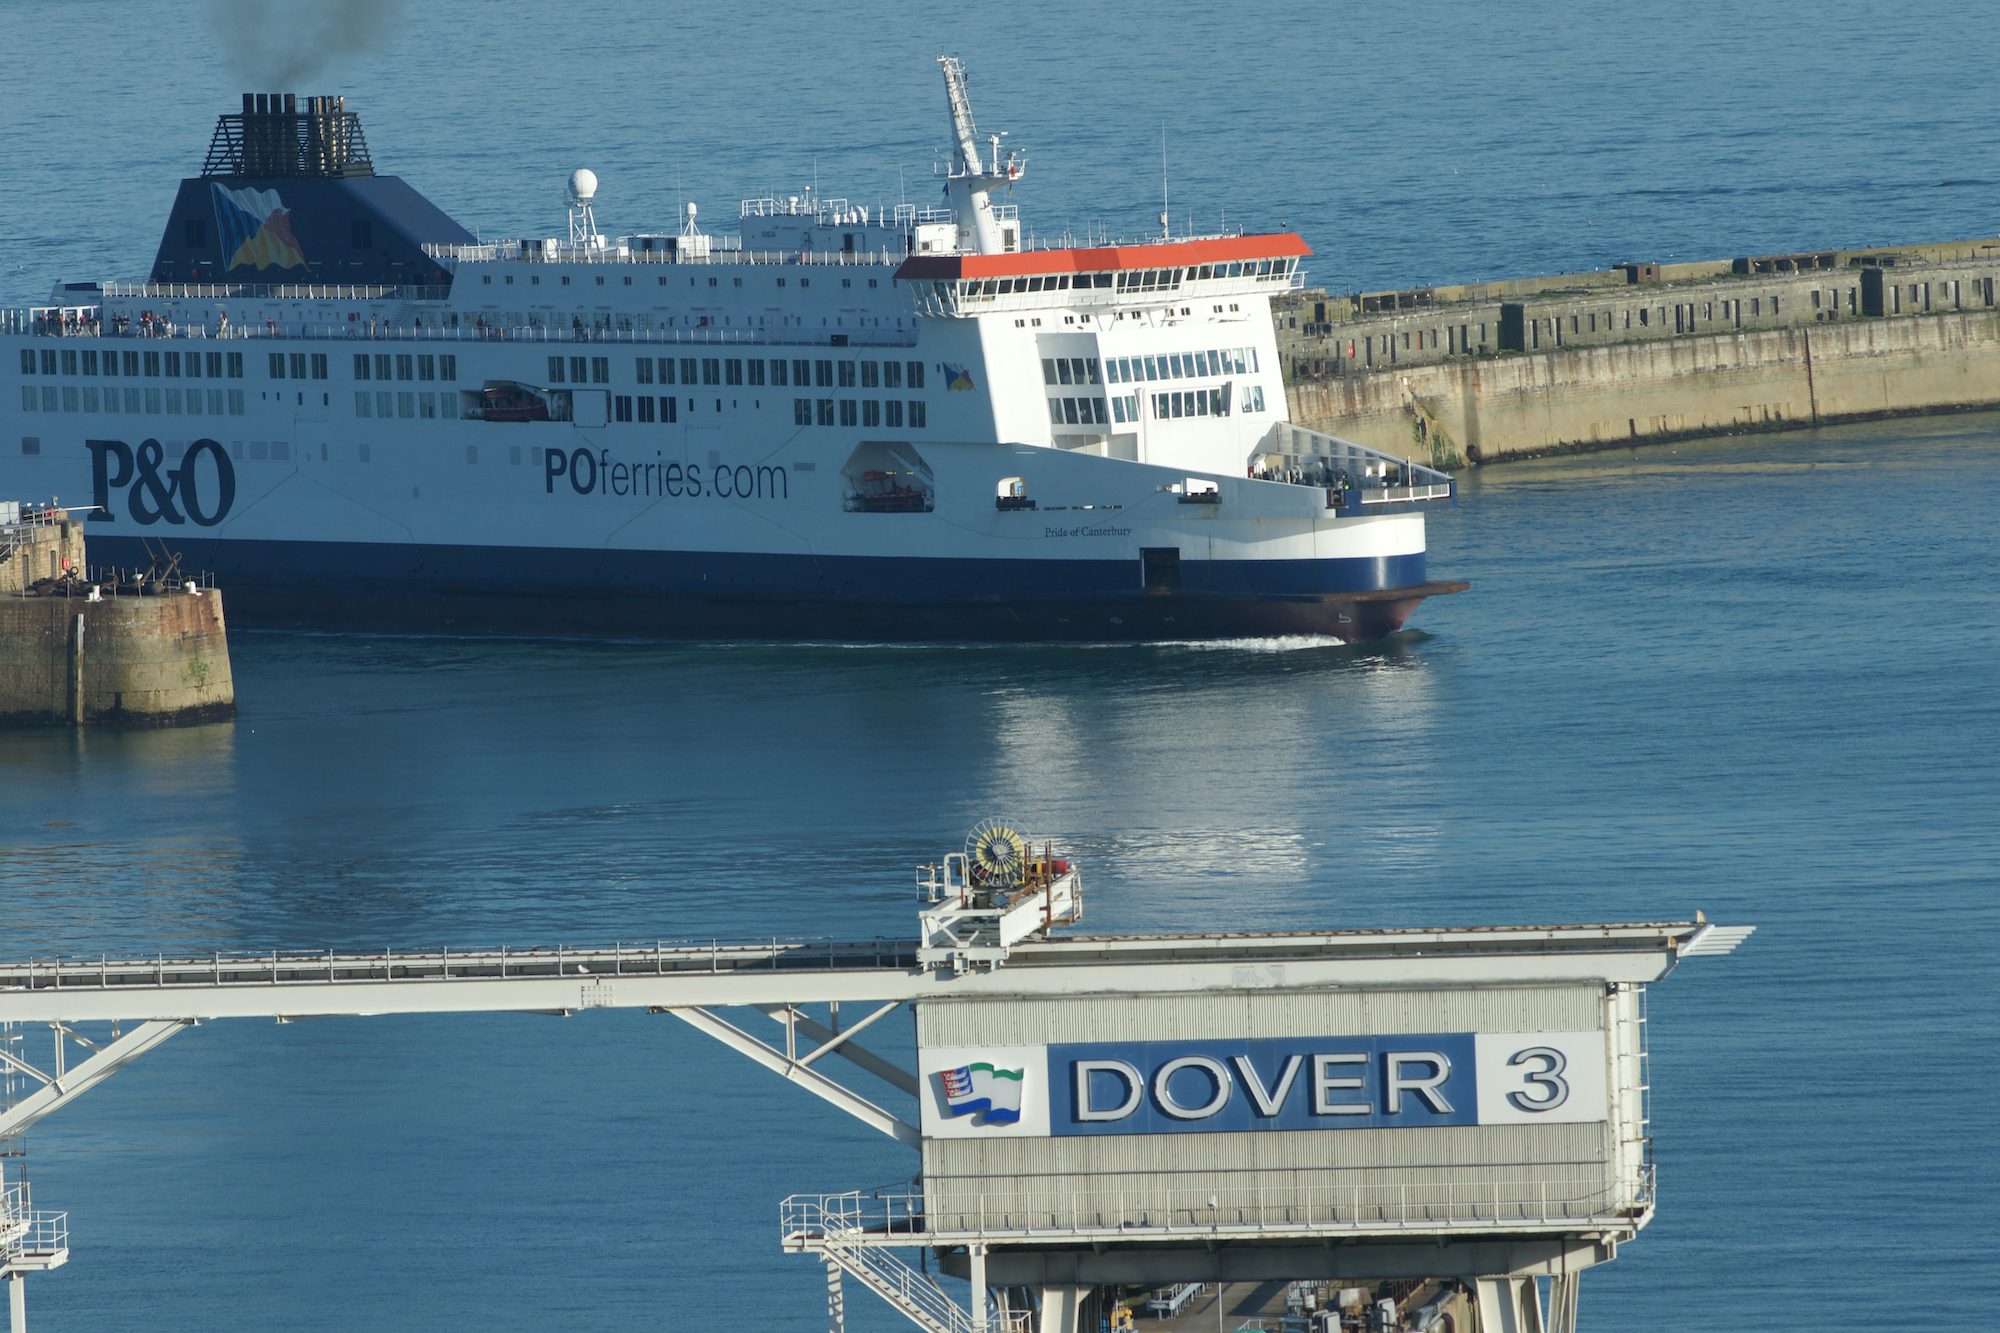 UK Detains Second P&O Ferry on Disrupted Dover-Calais Route